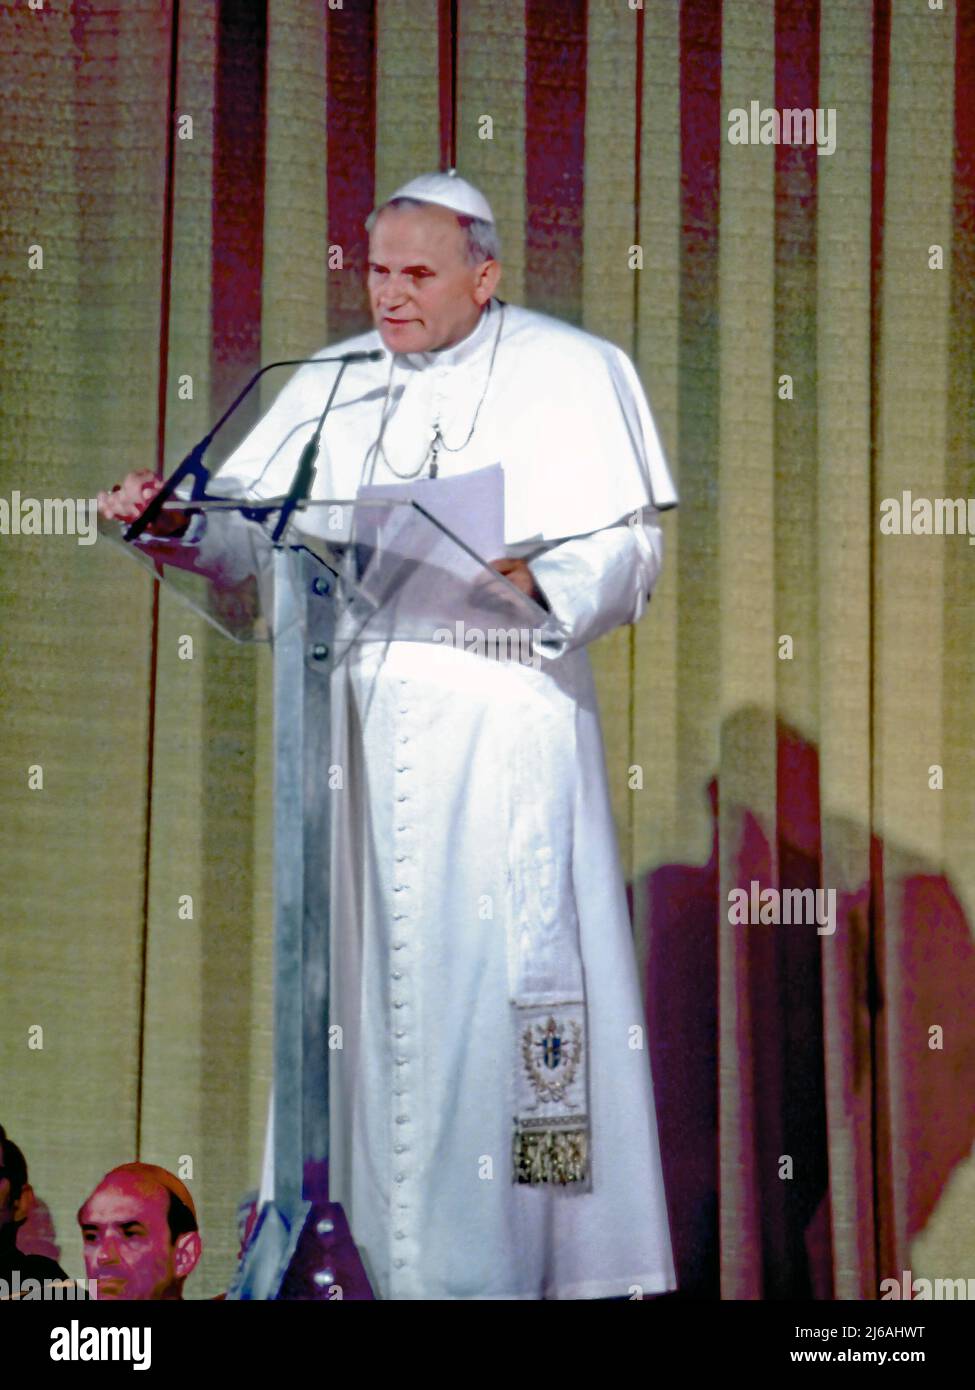 WASHINGTON DC - OCTOBER 7, 1979 Pope John Paul II at Catholic University National Shrine of the Immaculate Conception one of his stops on his 33 hour visit to Washington DC. Credit: Mark Reinstein/MediaPunch Stock Photo